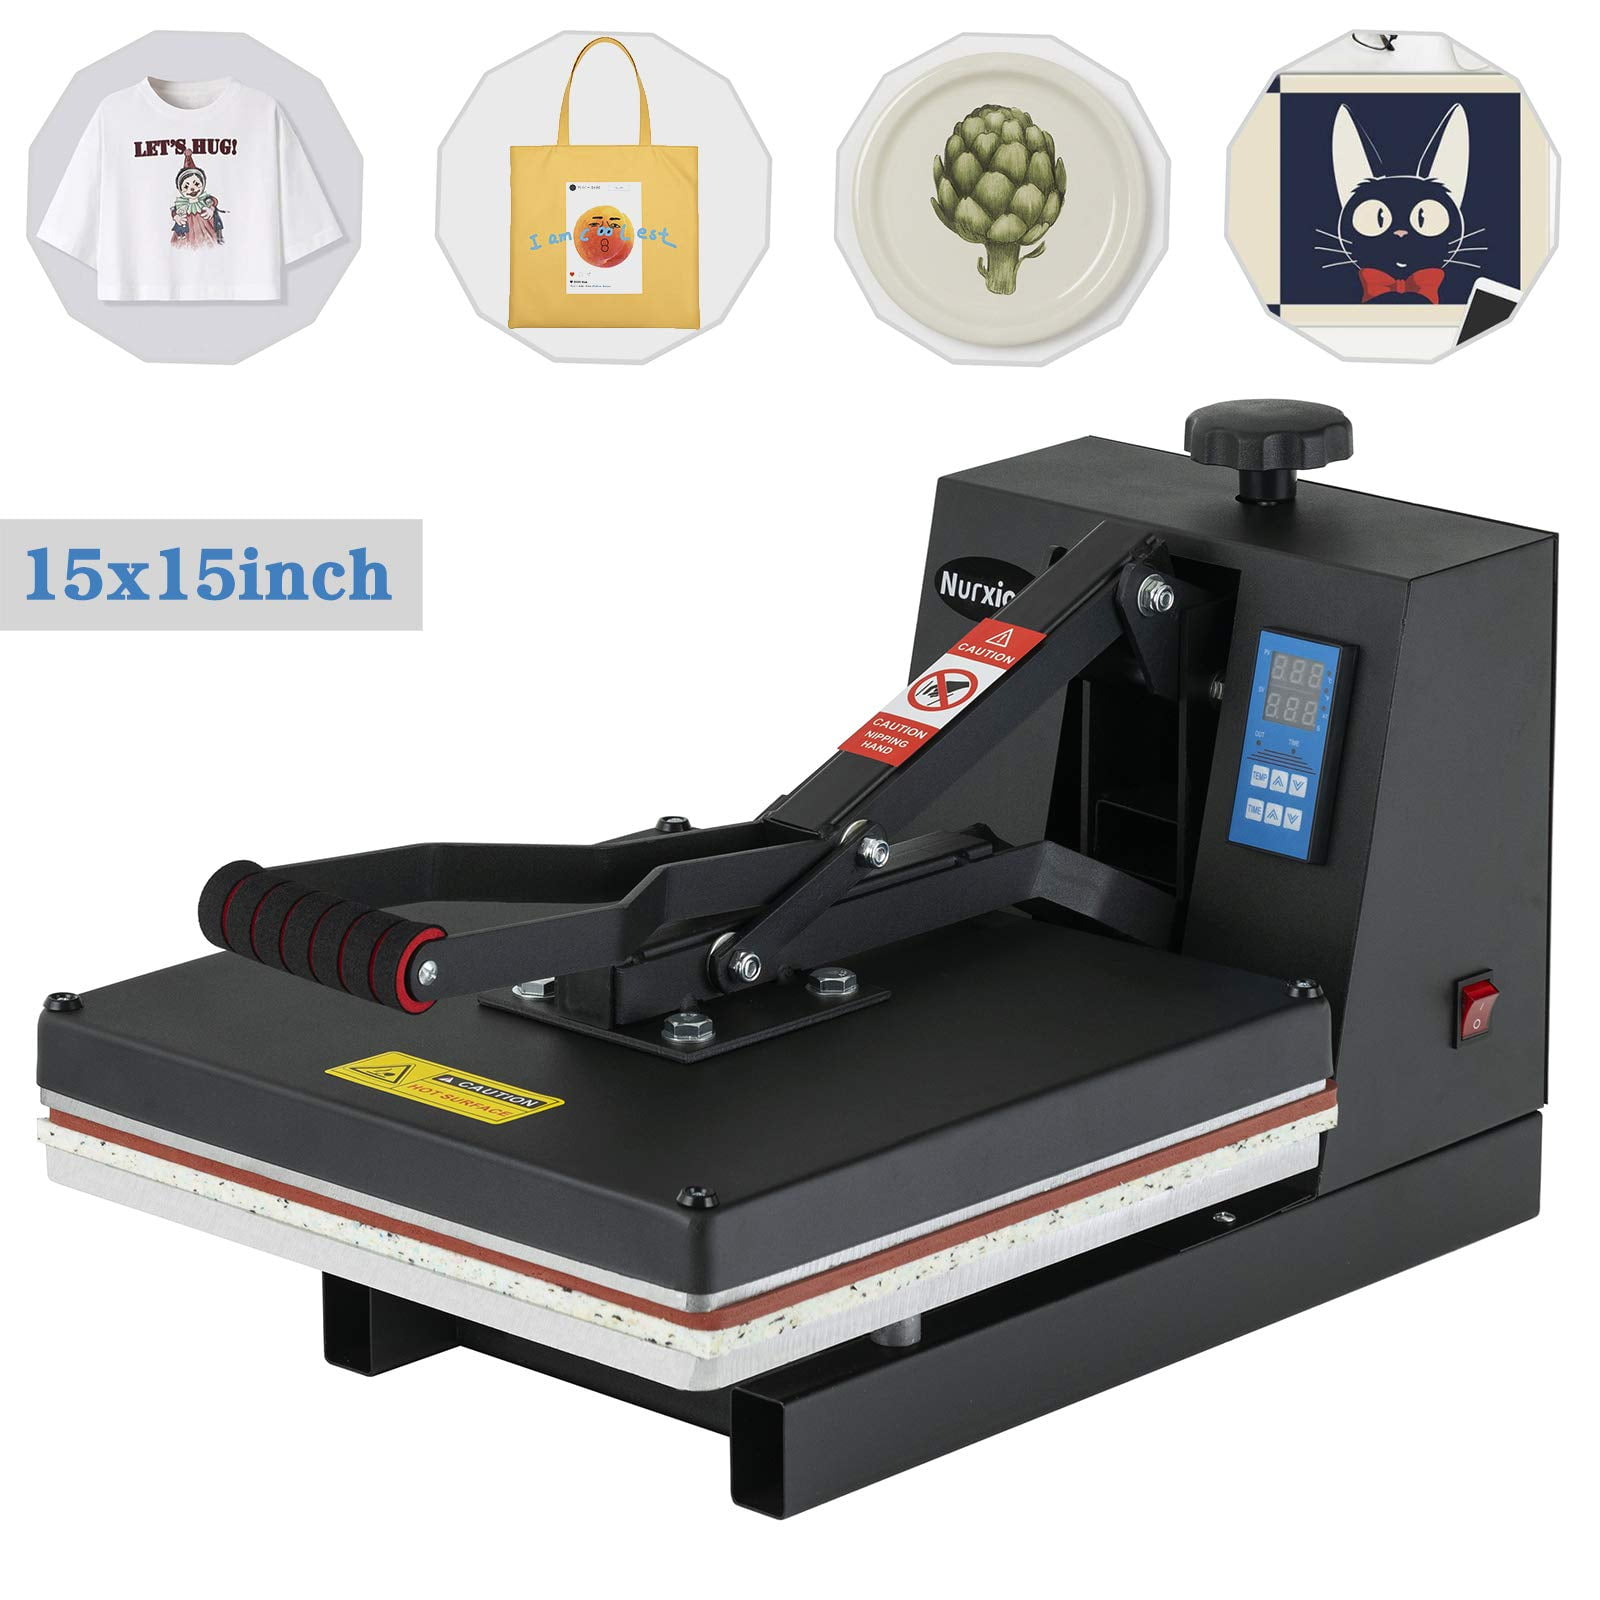 Industrial Sublimation Heat Press Machine up to 5XL Size - xPress M110 